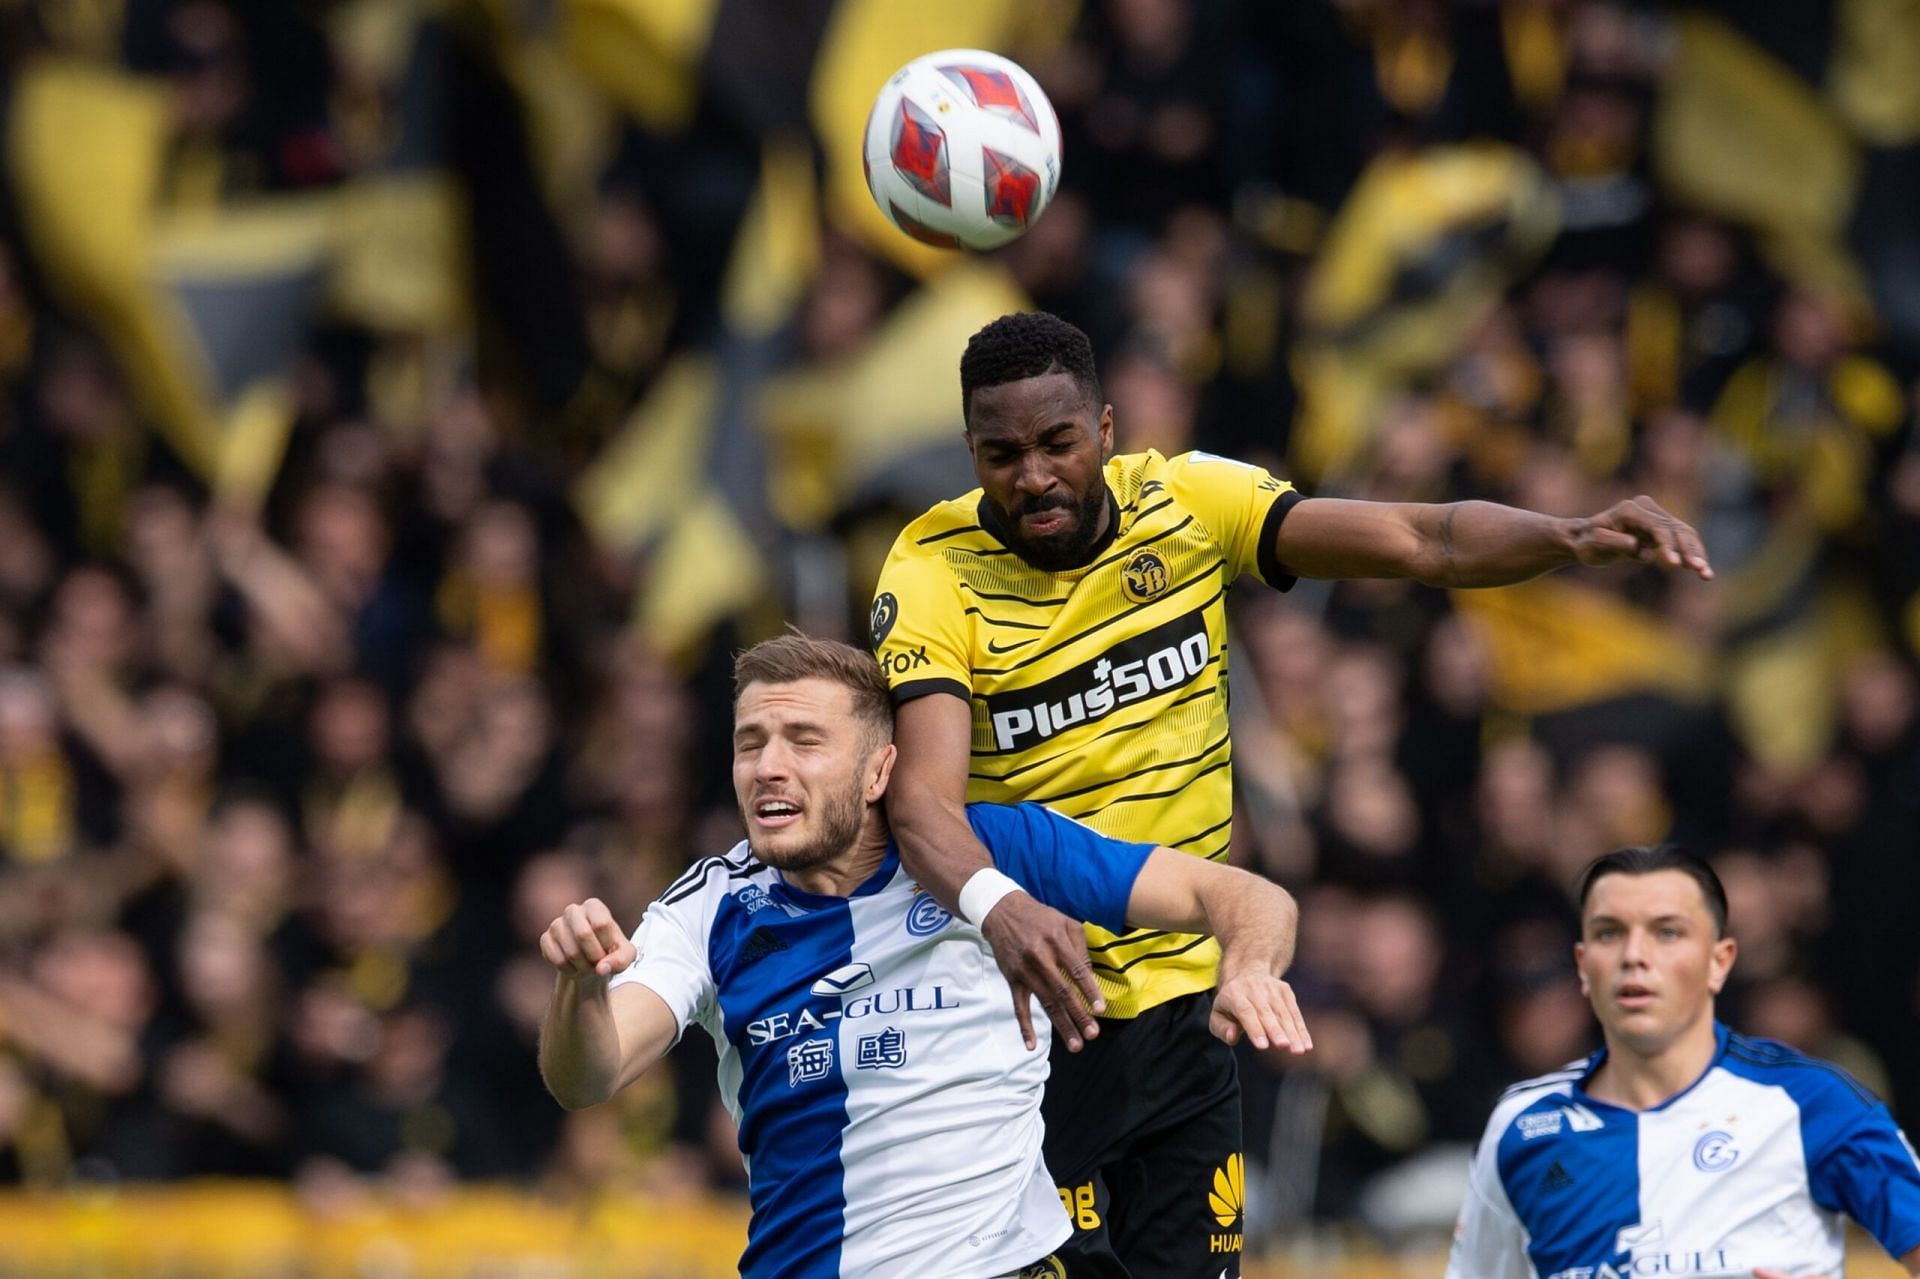 Young Boys have already beaten Zurich twice this season